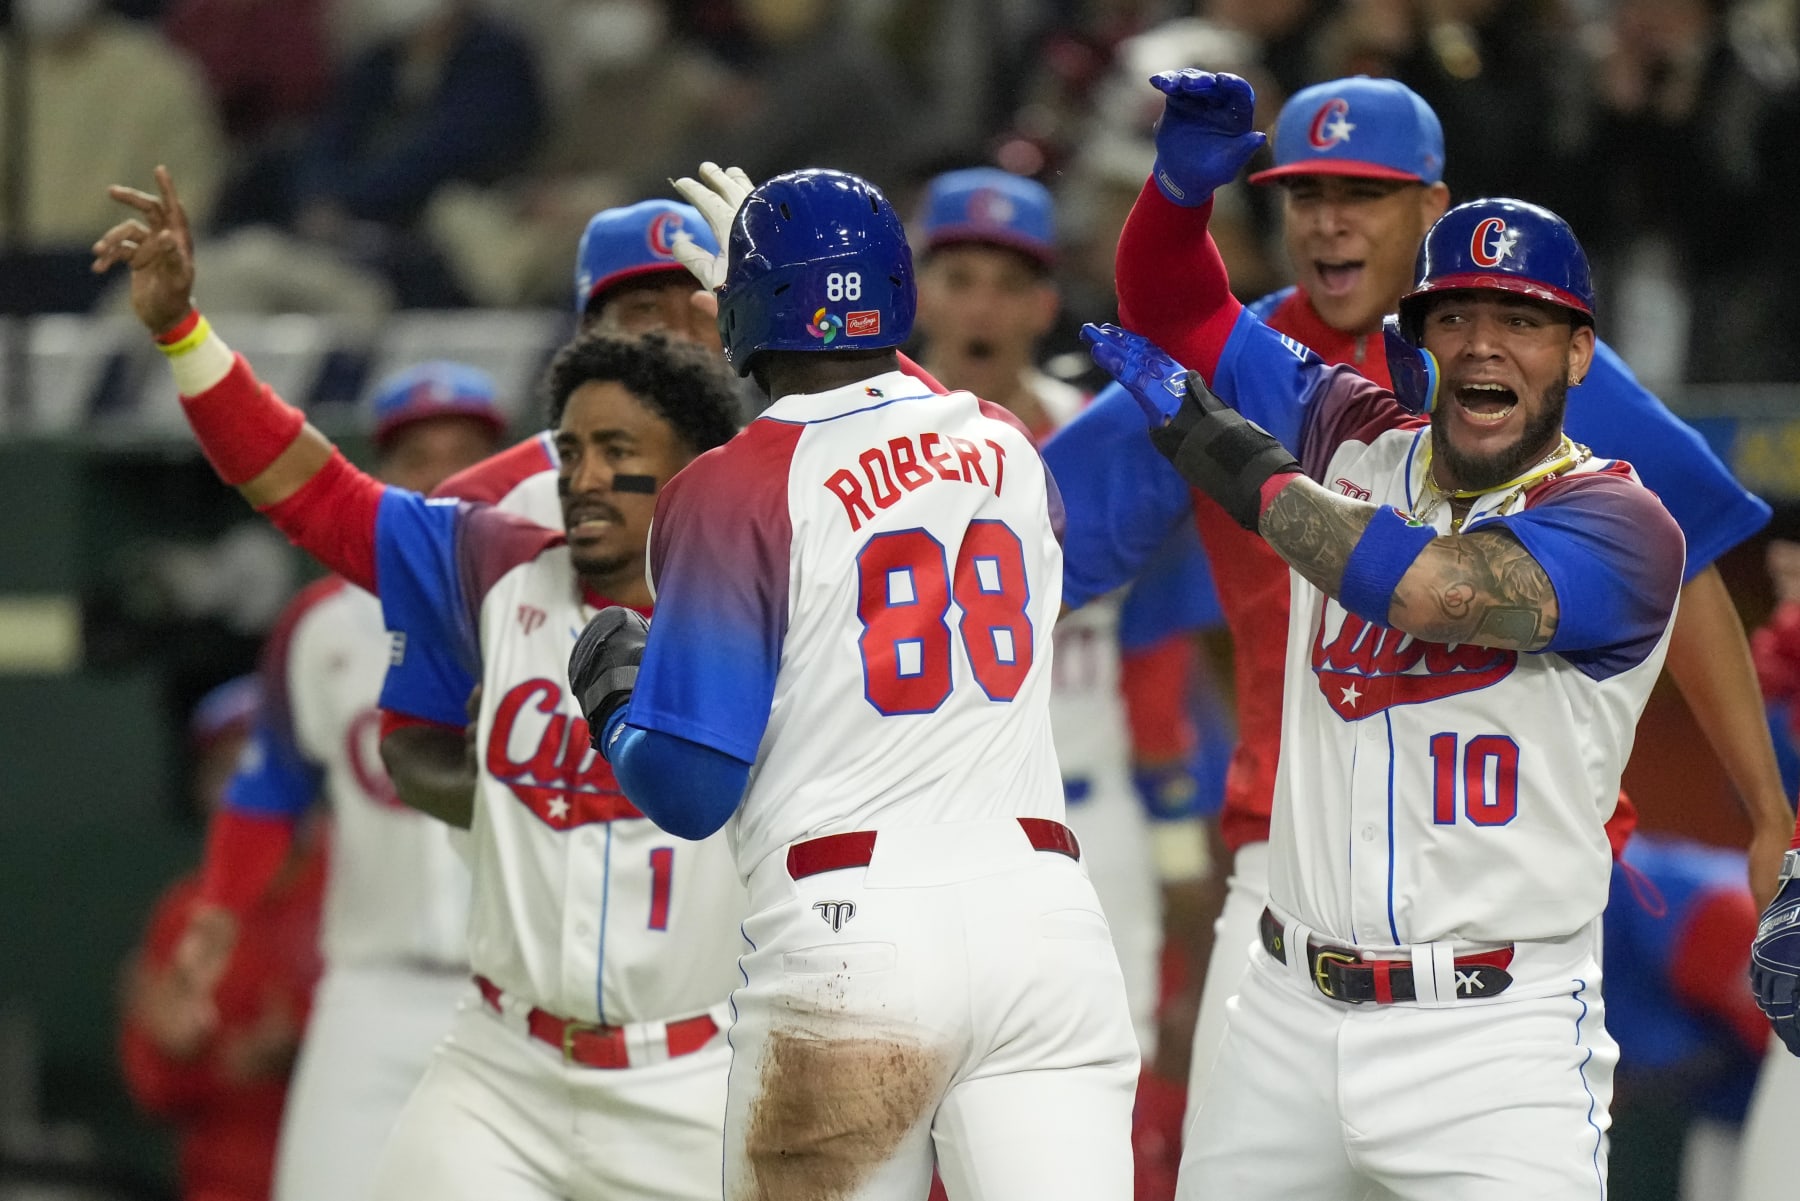 MLB News: Puerto Rico advances to the quarterfinals of the World